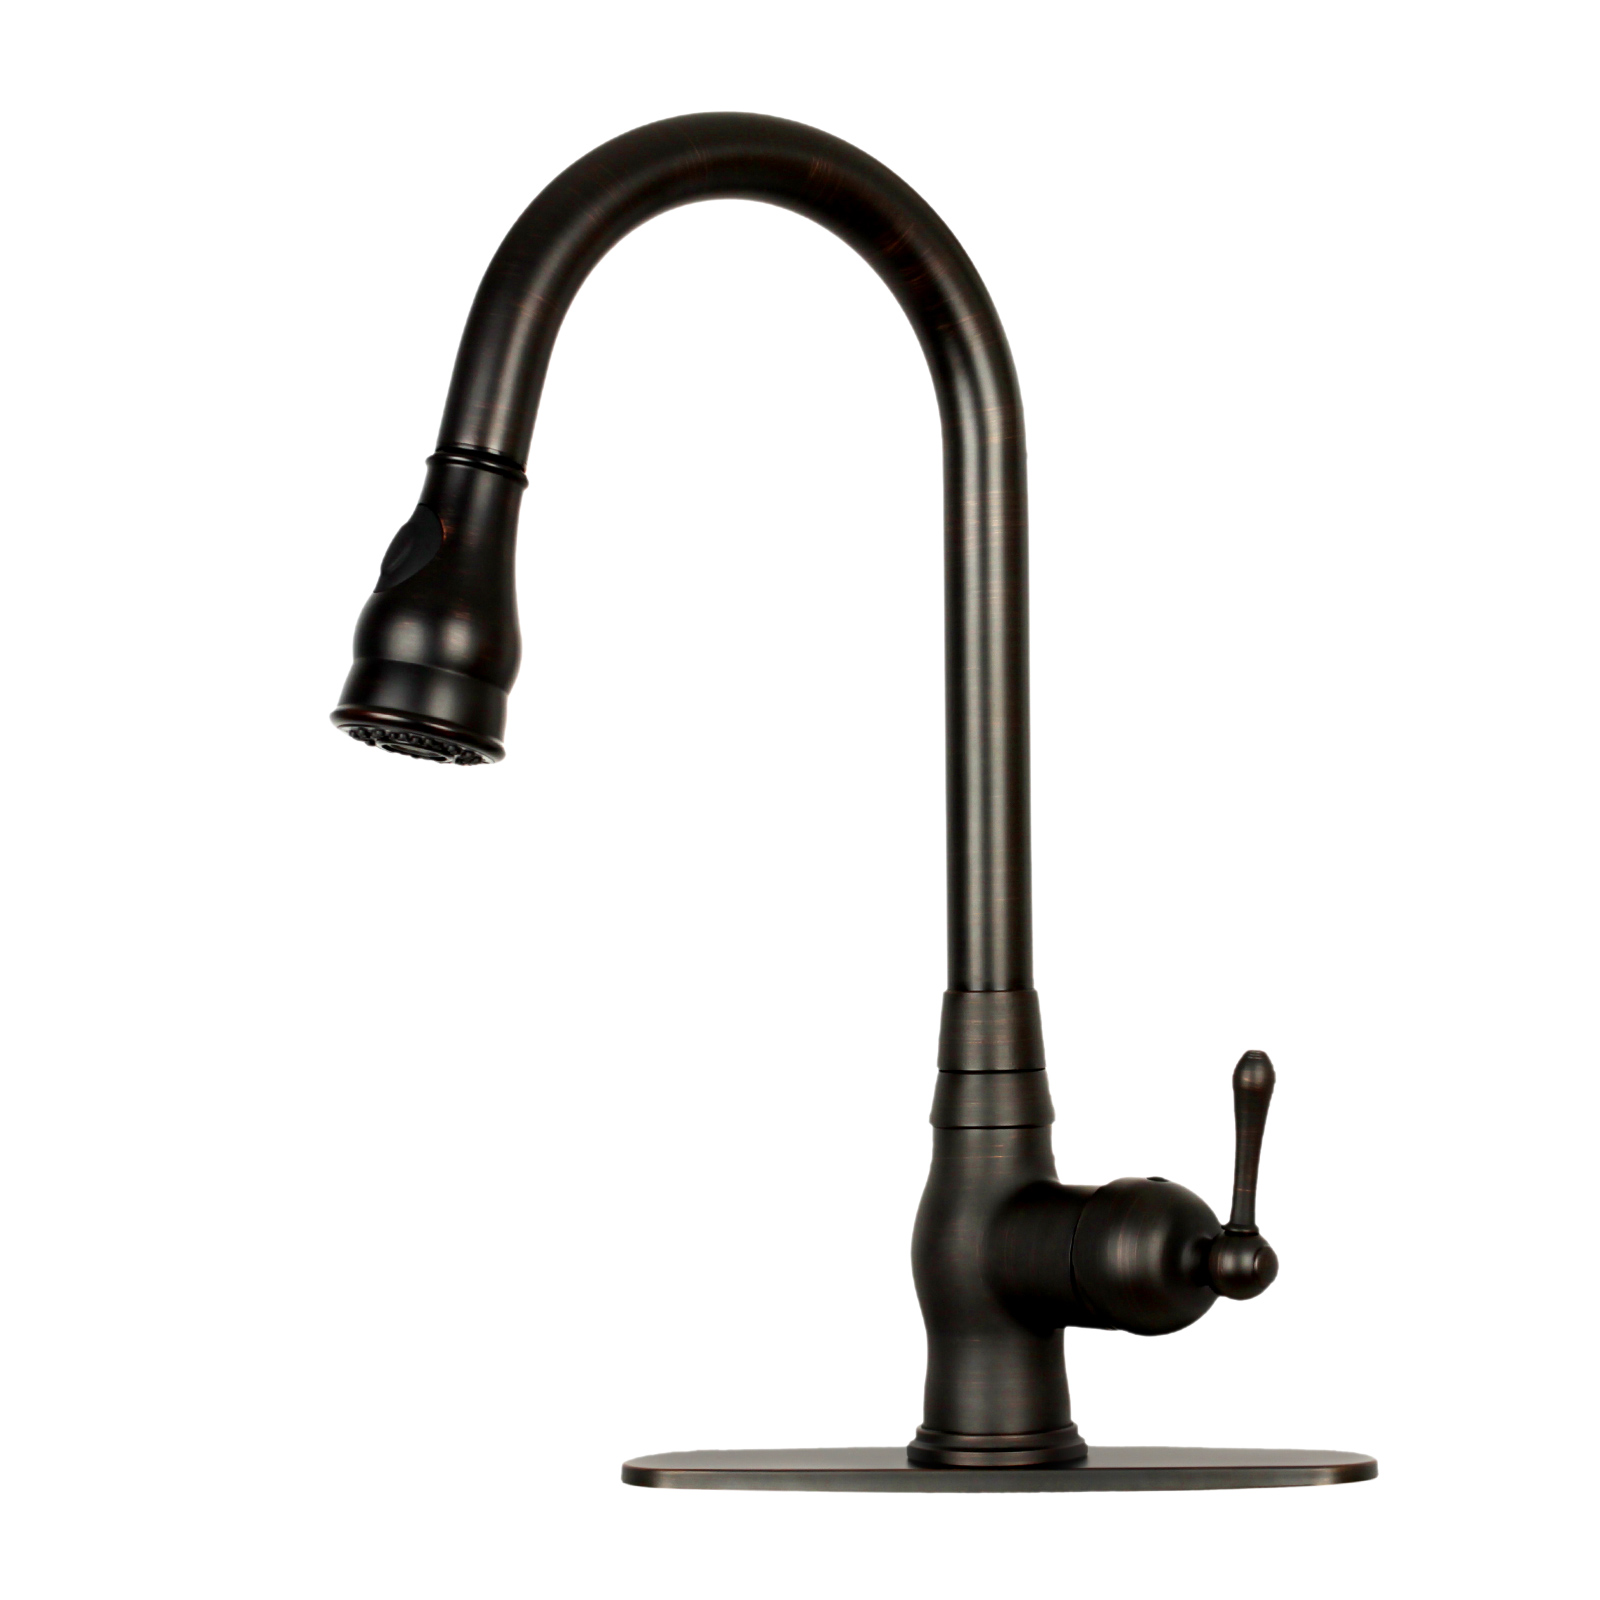 Pull Down Kitchen Sink Faucet with Deck Plate Solid Brass Single Handle Pull Out Sprayer Oil Rubbed Bronze Kitchen Faucet